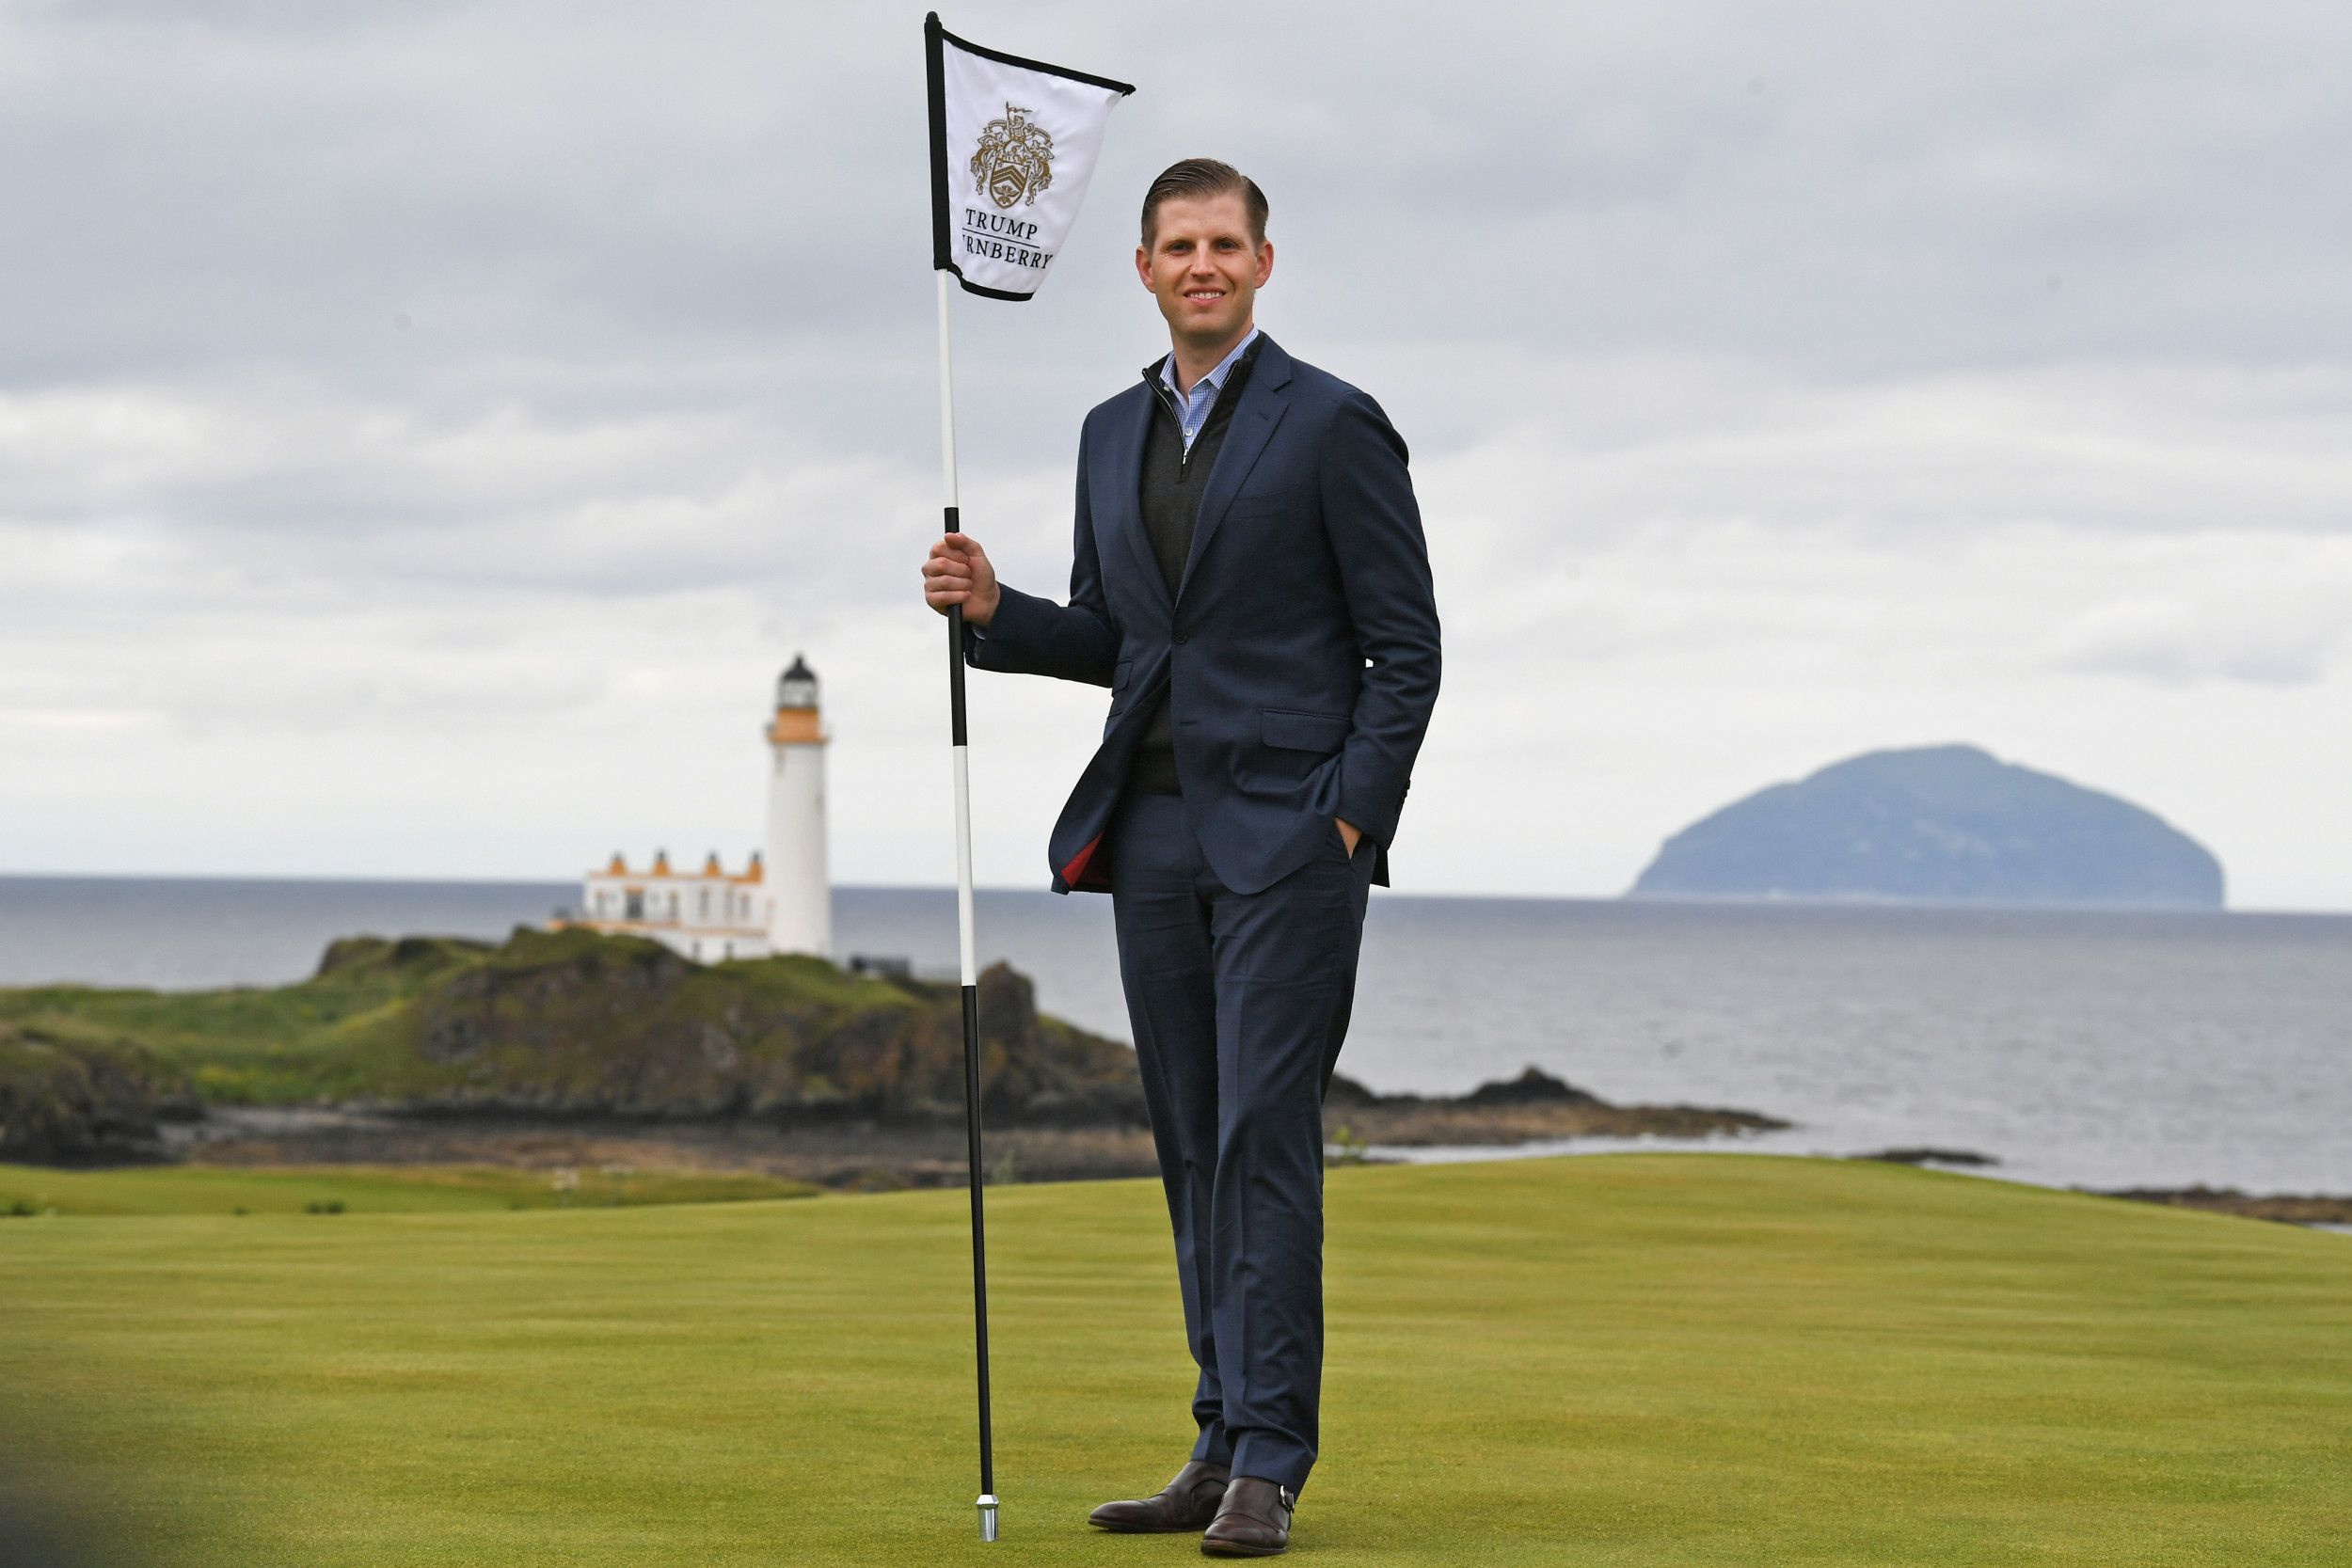 trump-turnberry-snubbed-in-favour-royal-troon-hosting-2023-open